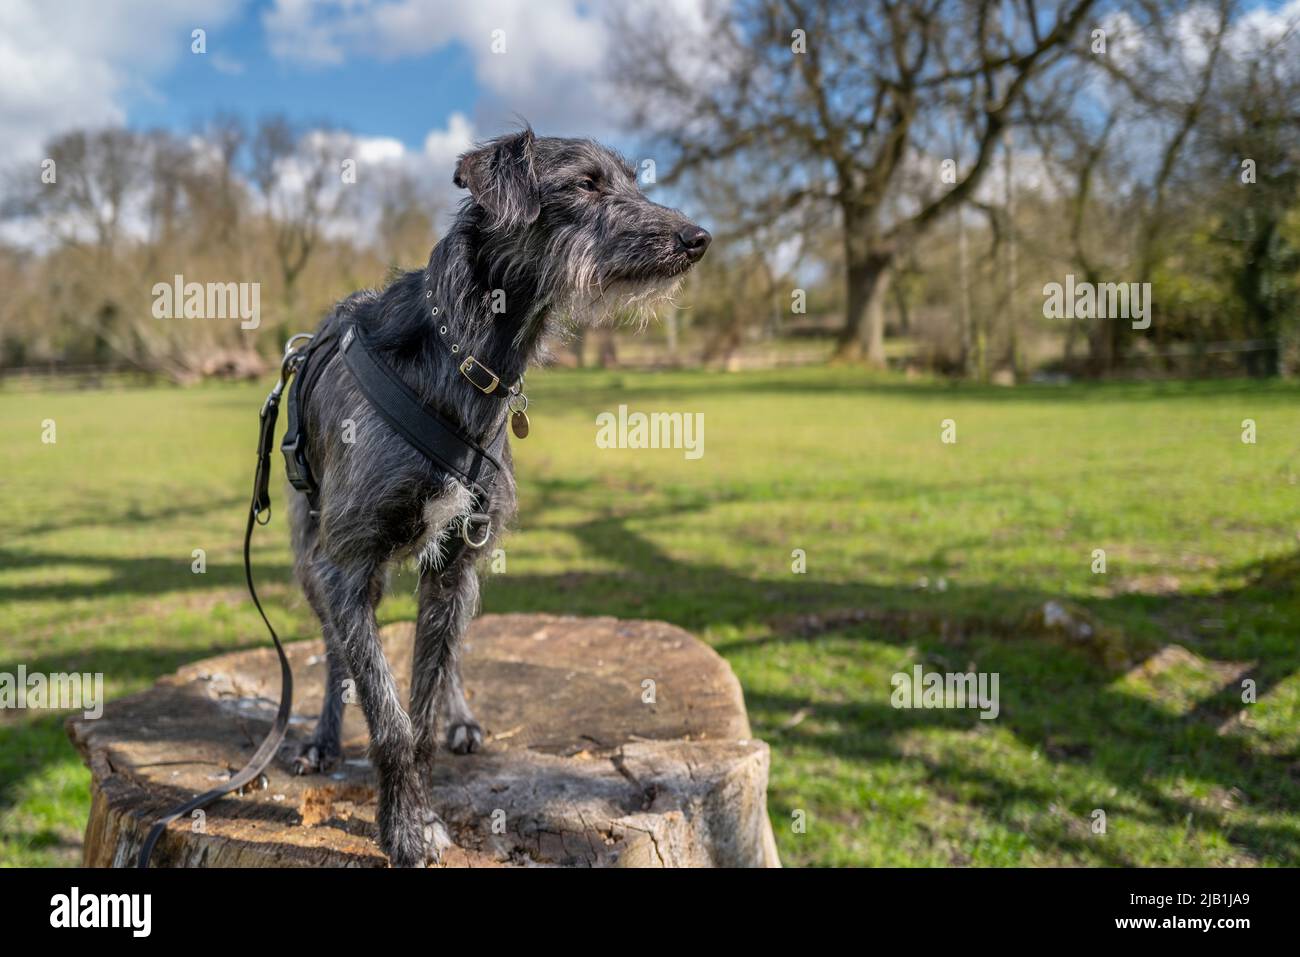 A Dog stand on an old tree stump looking out. Stock Photo